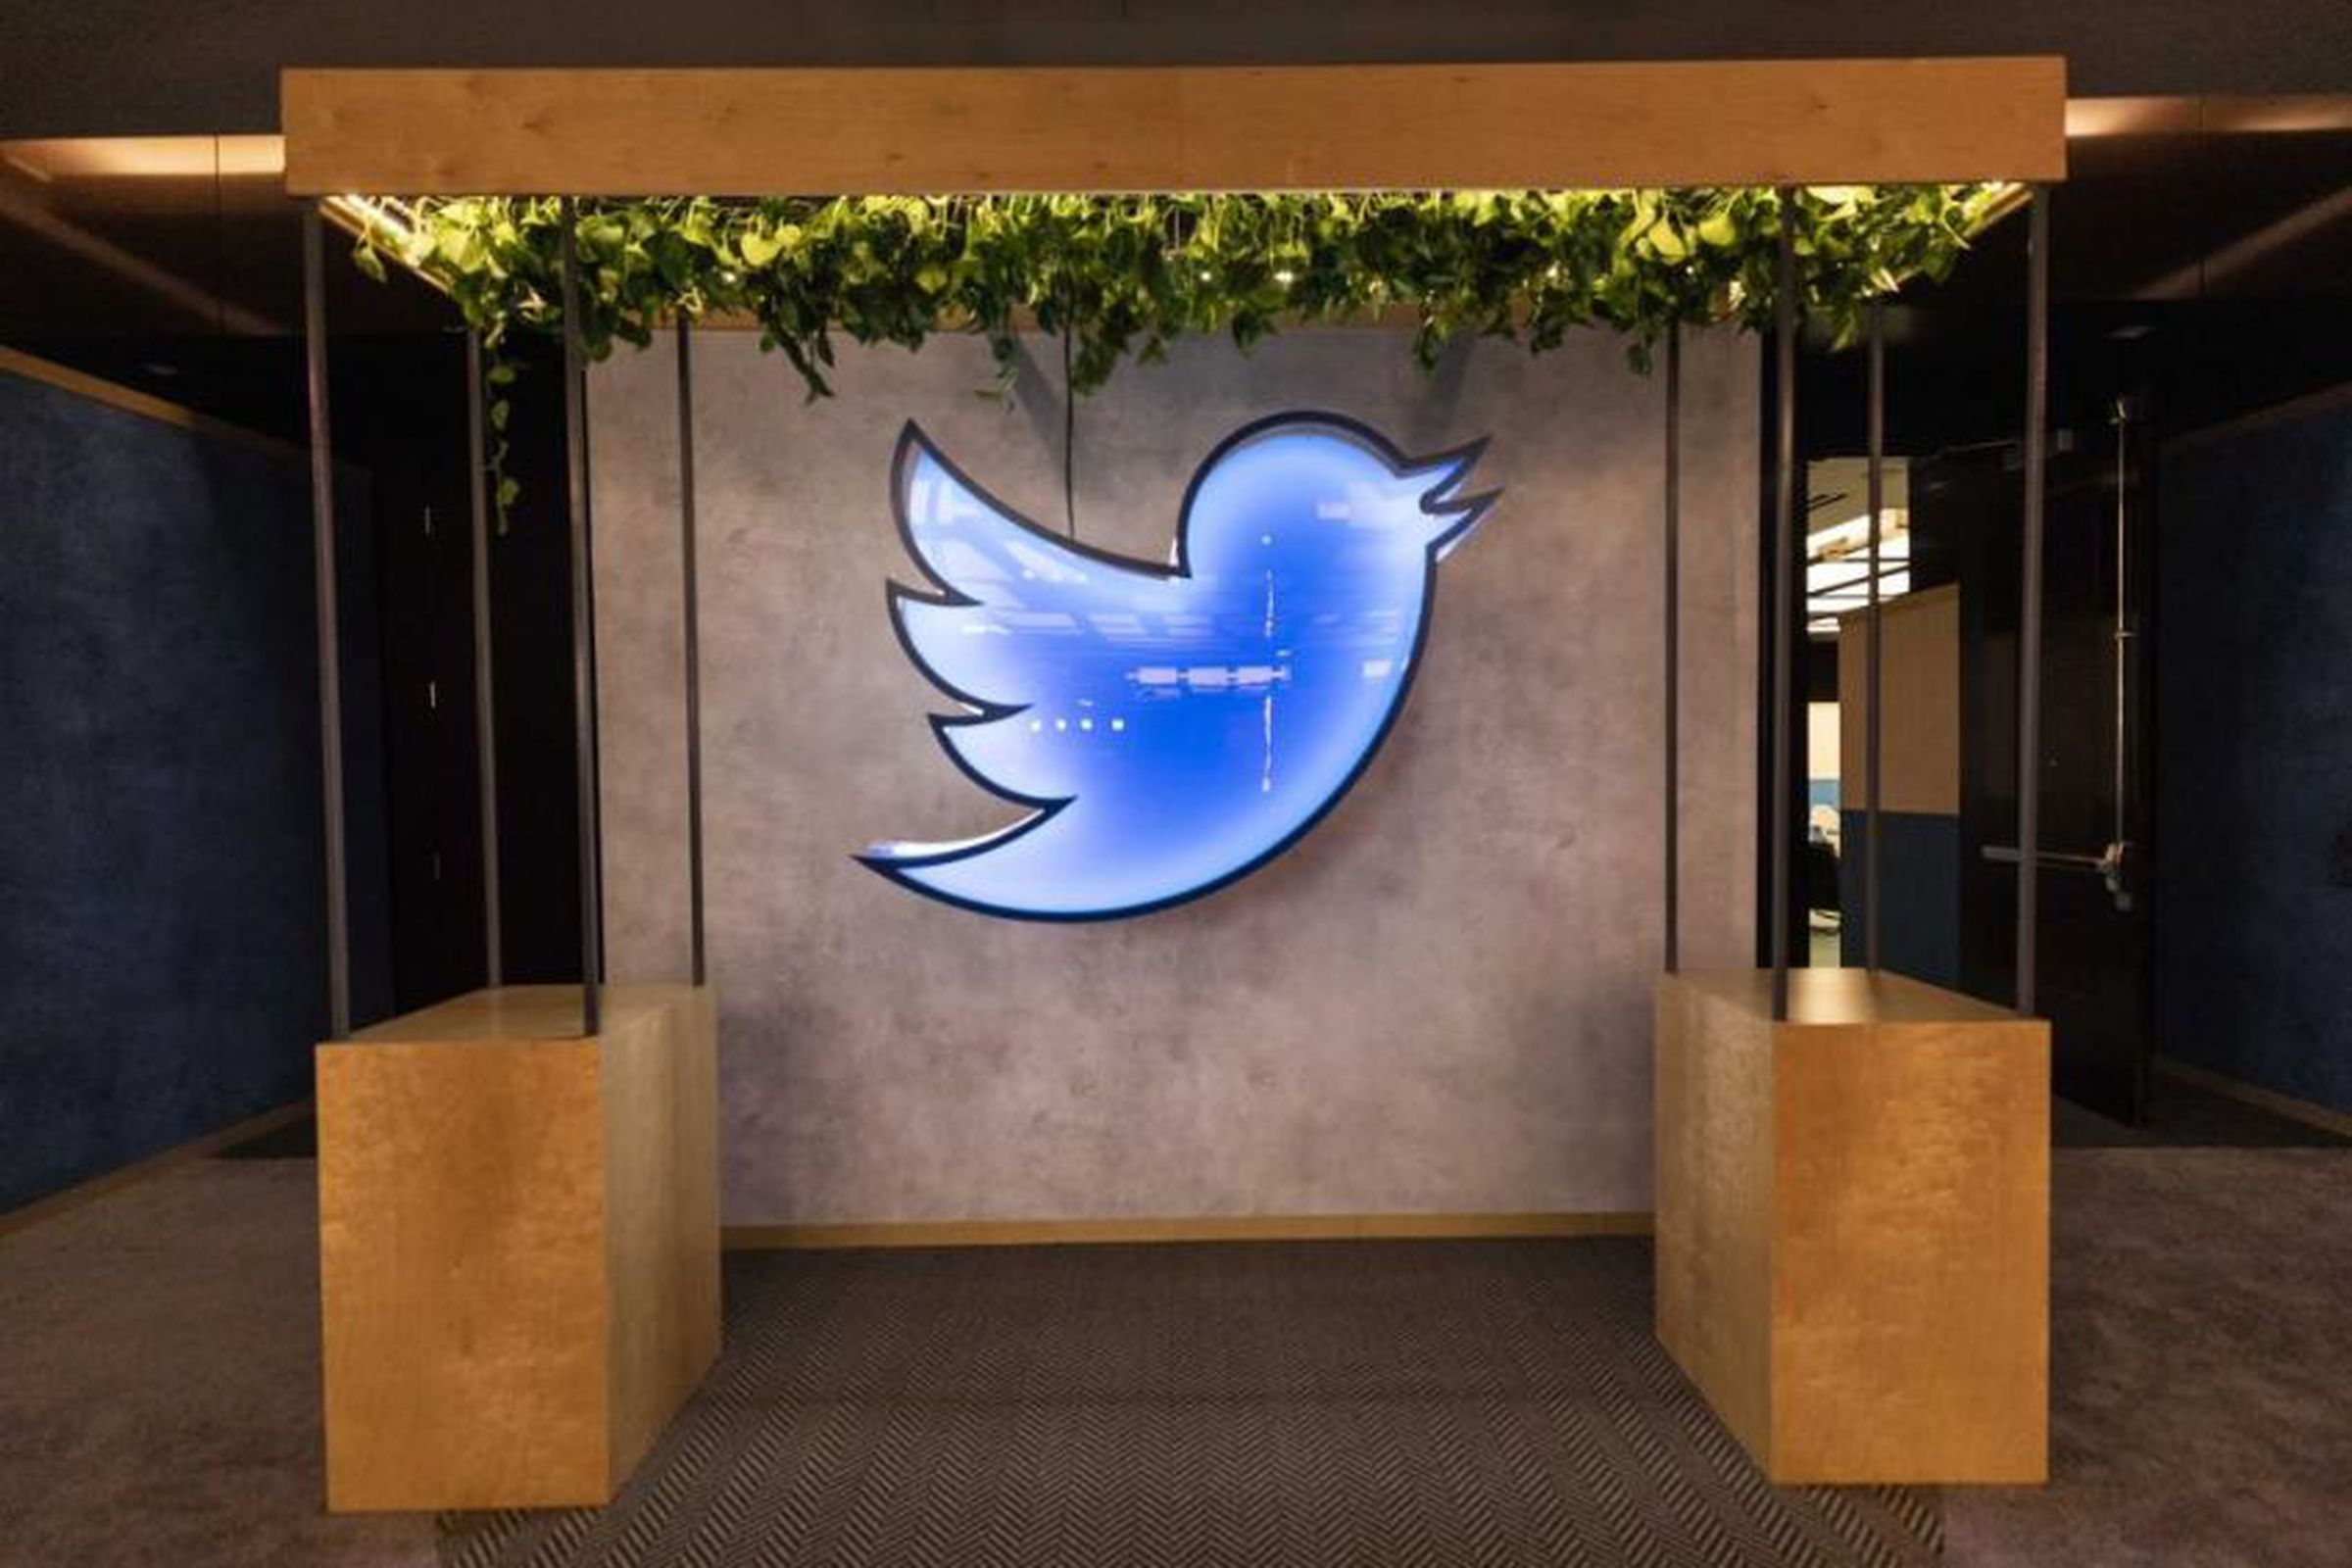 Coffee makers and statues: Twitter starts auctioning off assets from its San Francisco headquarters